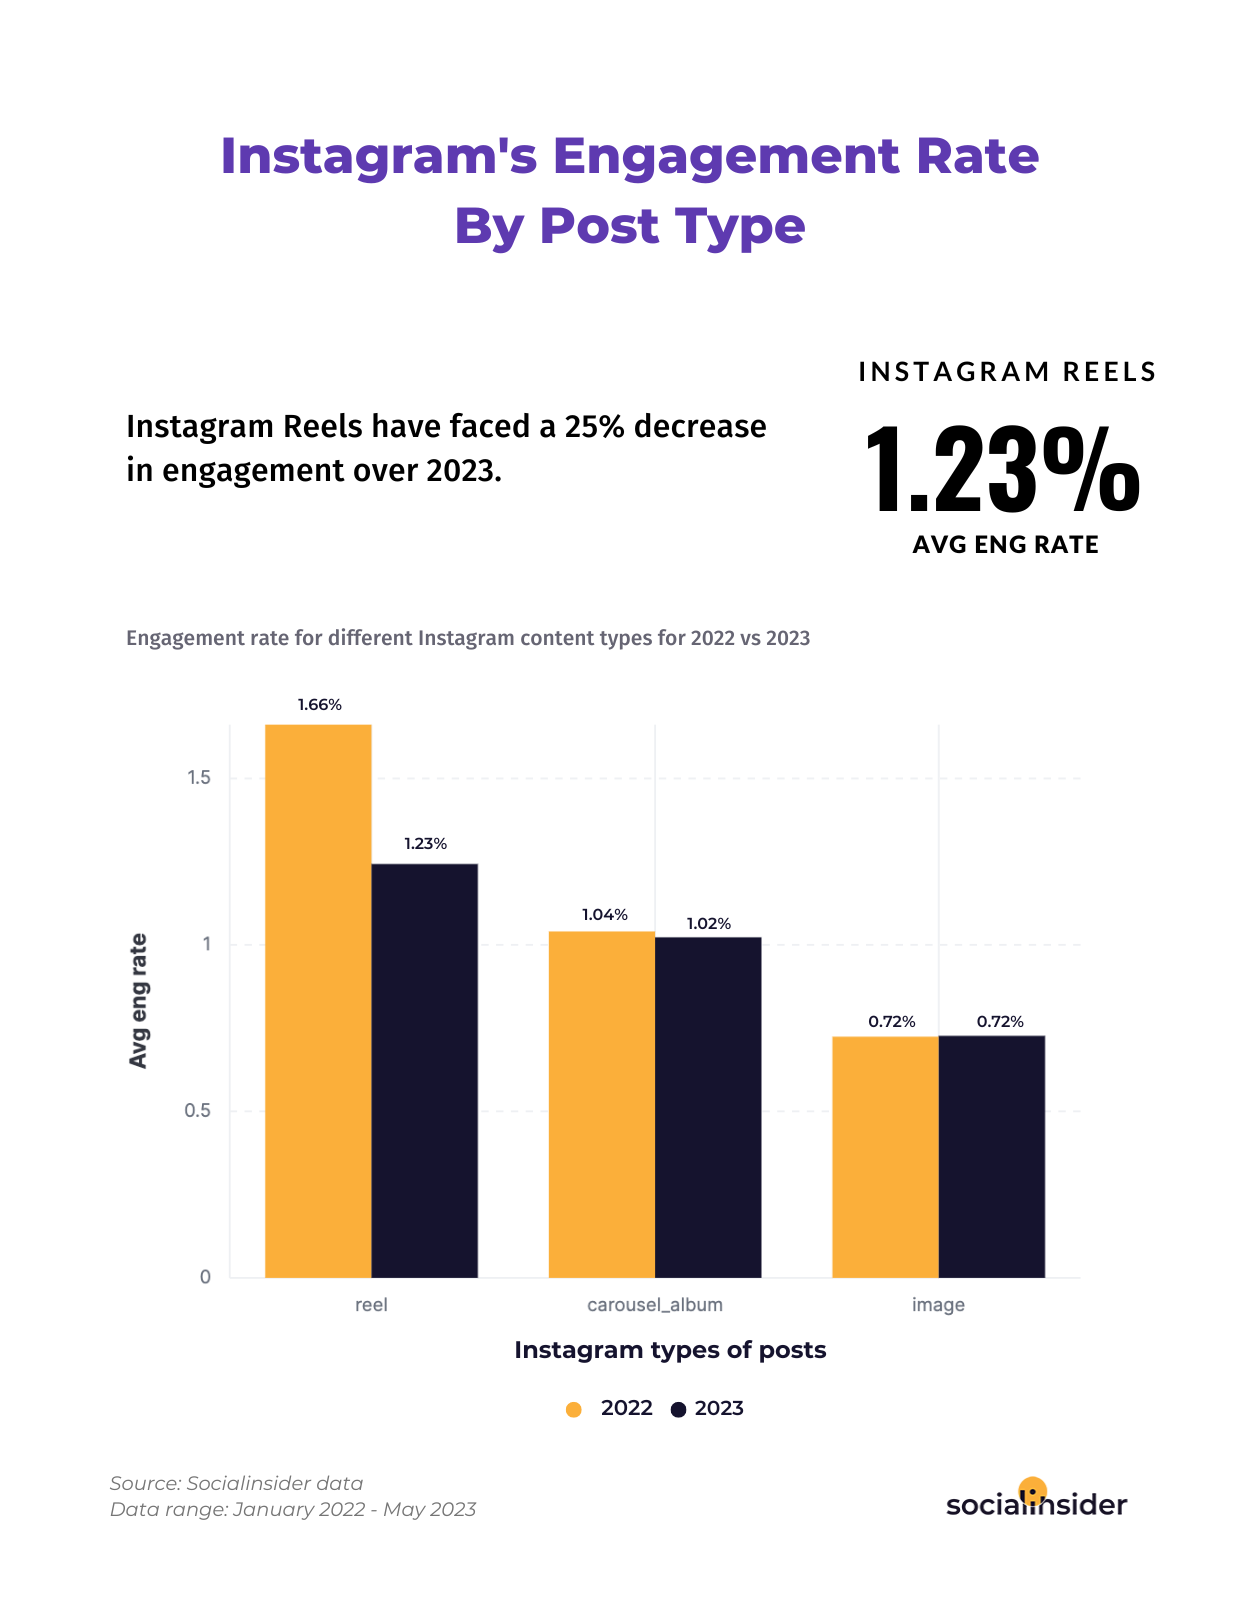 This is a chart showing what's the average engagement rate on Instagram over 2022 vs 2023 for different content types.